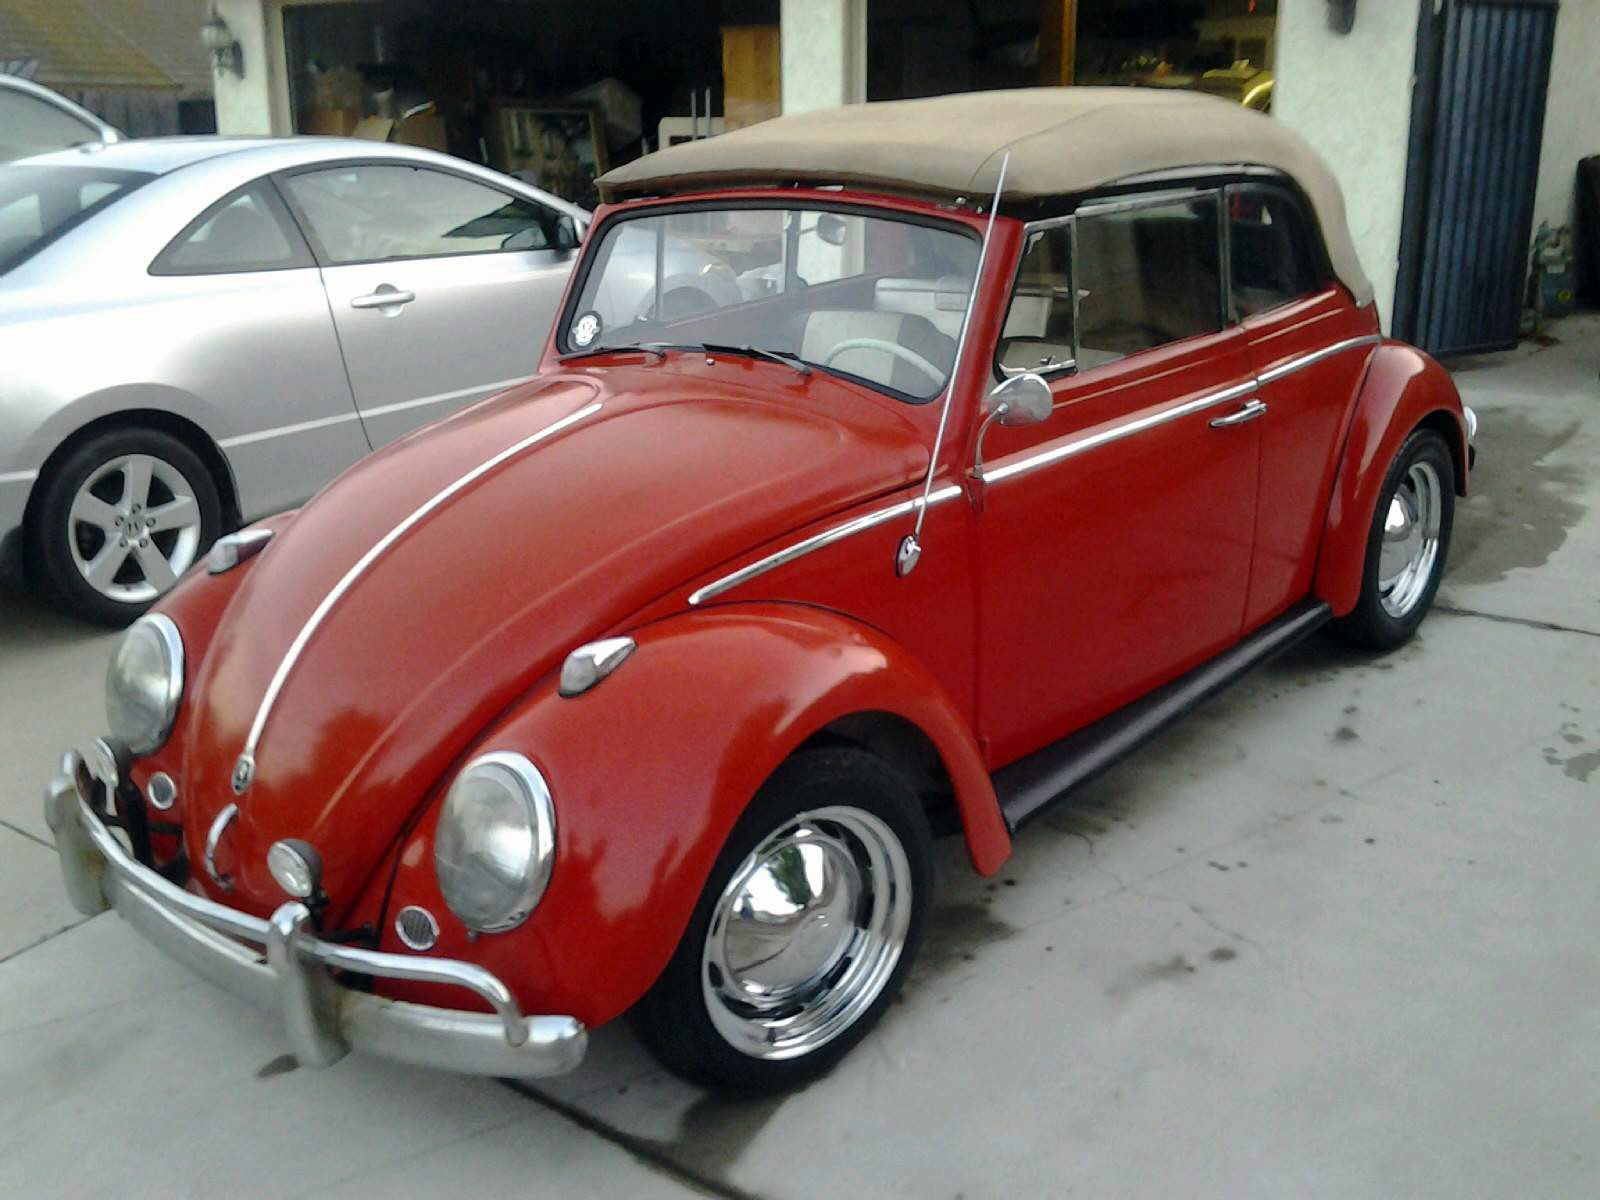 29 Spectacular Vw Beetle Vase 2024 free download vw beetle vase of cool review about volkswagen beetle interior with cool images in 5f0d9b0bf3a19fd9240845d796cad06f cool review about volkswagen beetle interior with cool images cars review